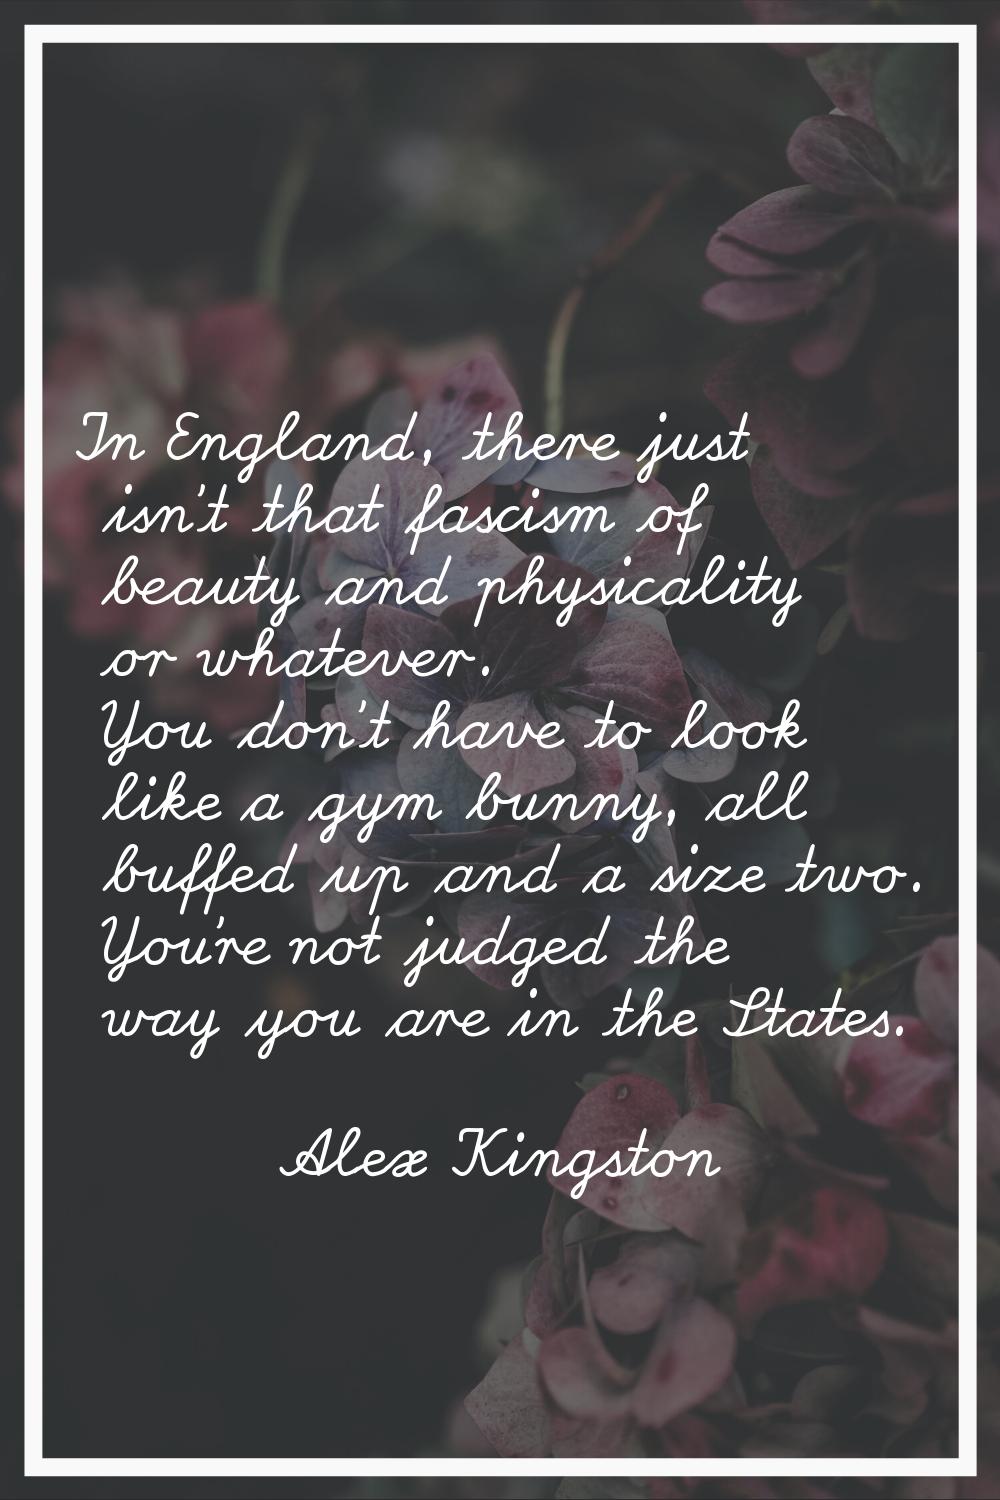 In England, there just isn't that fascism of beauty and physicality or whatever. You don't have to 